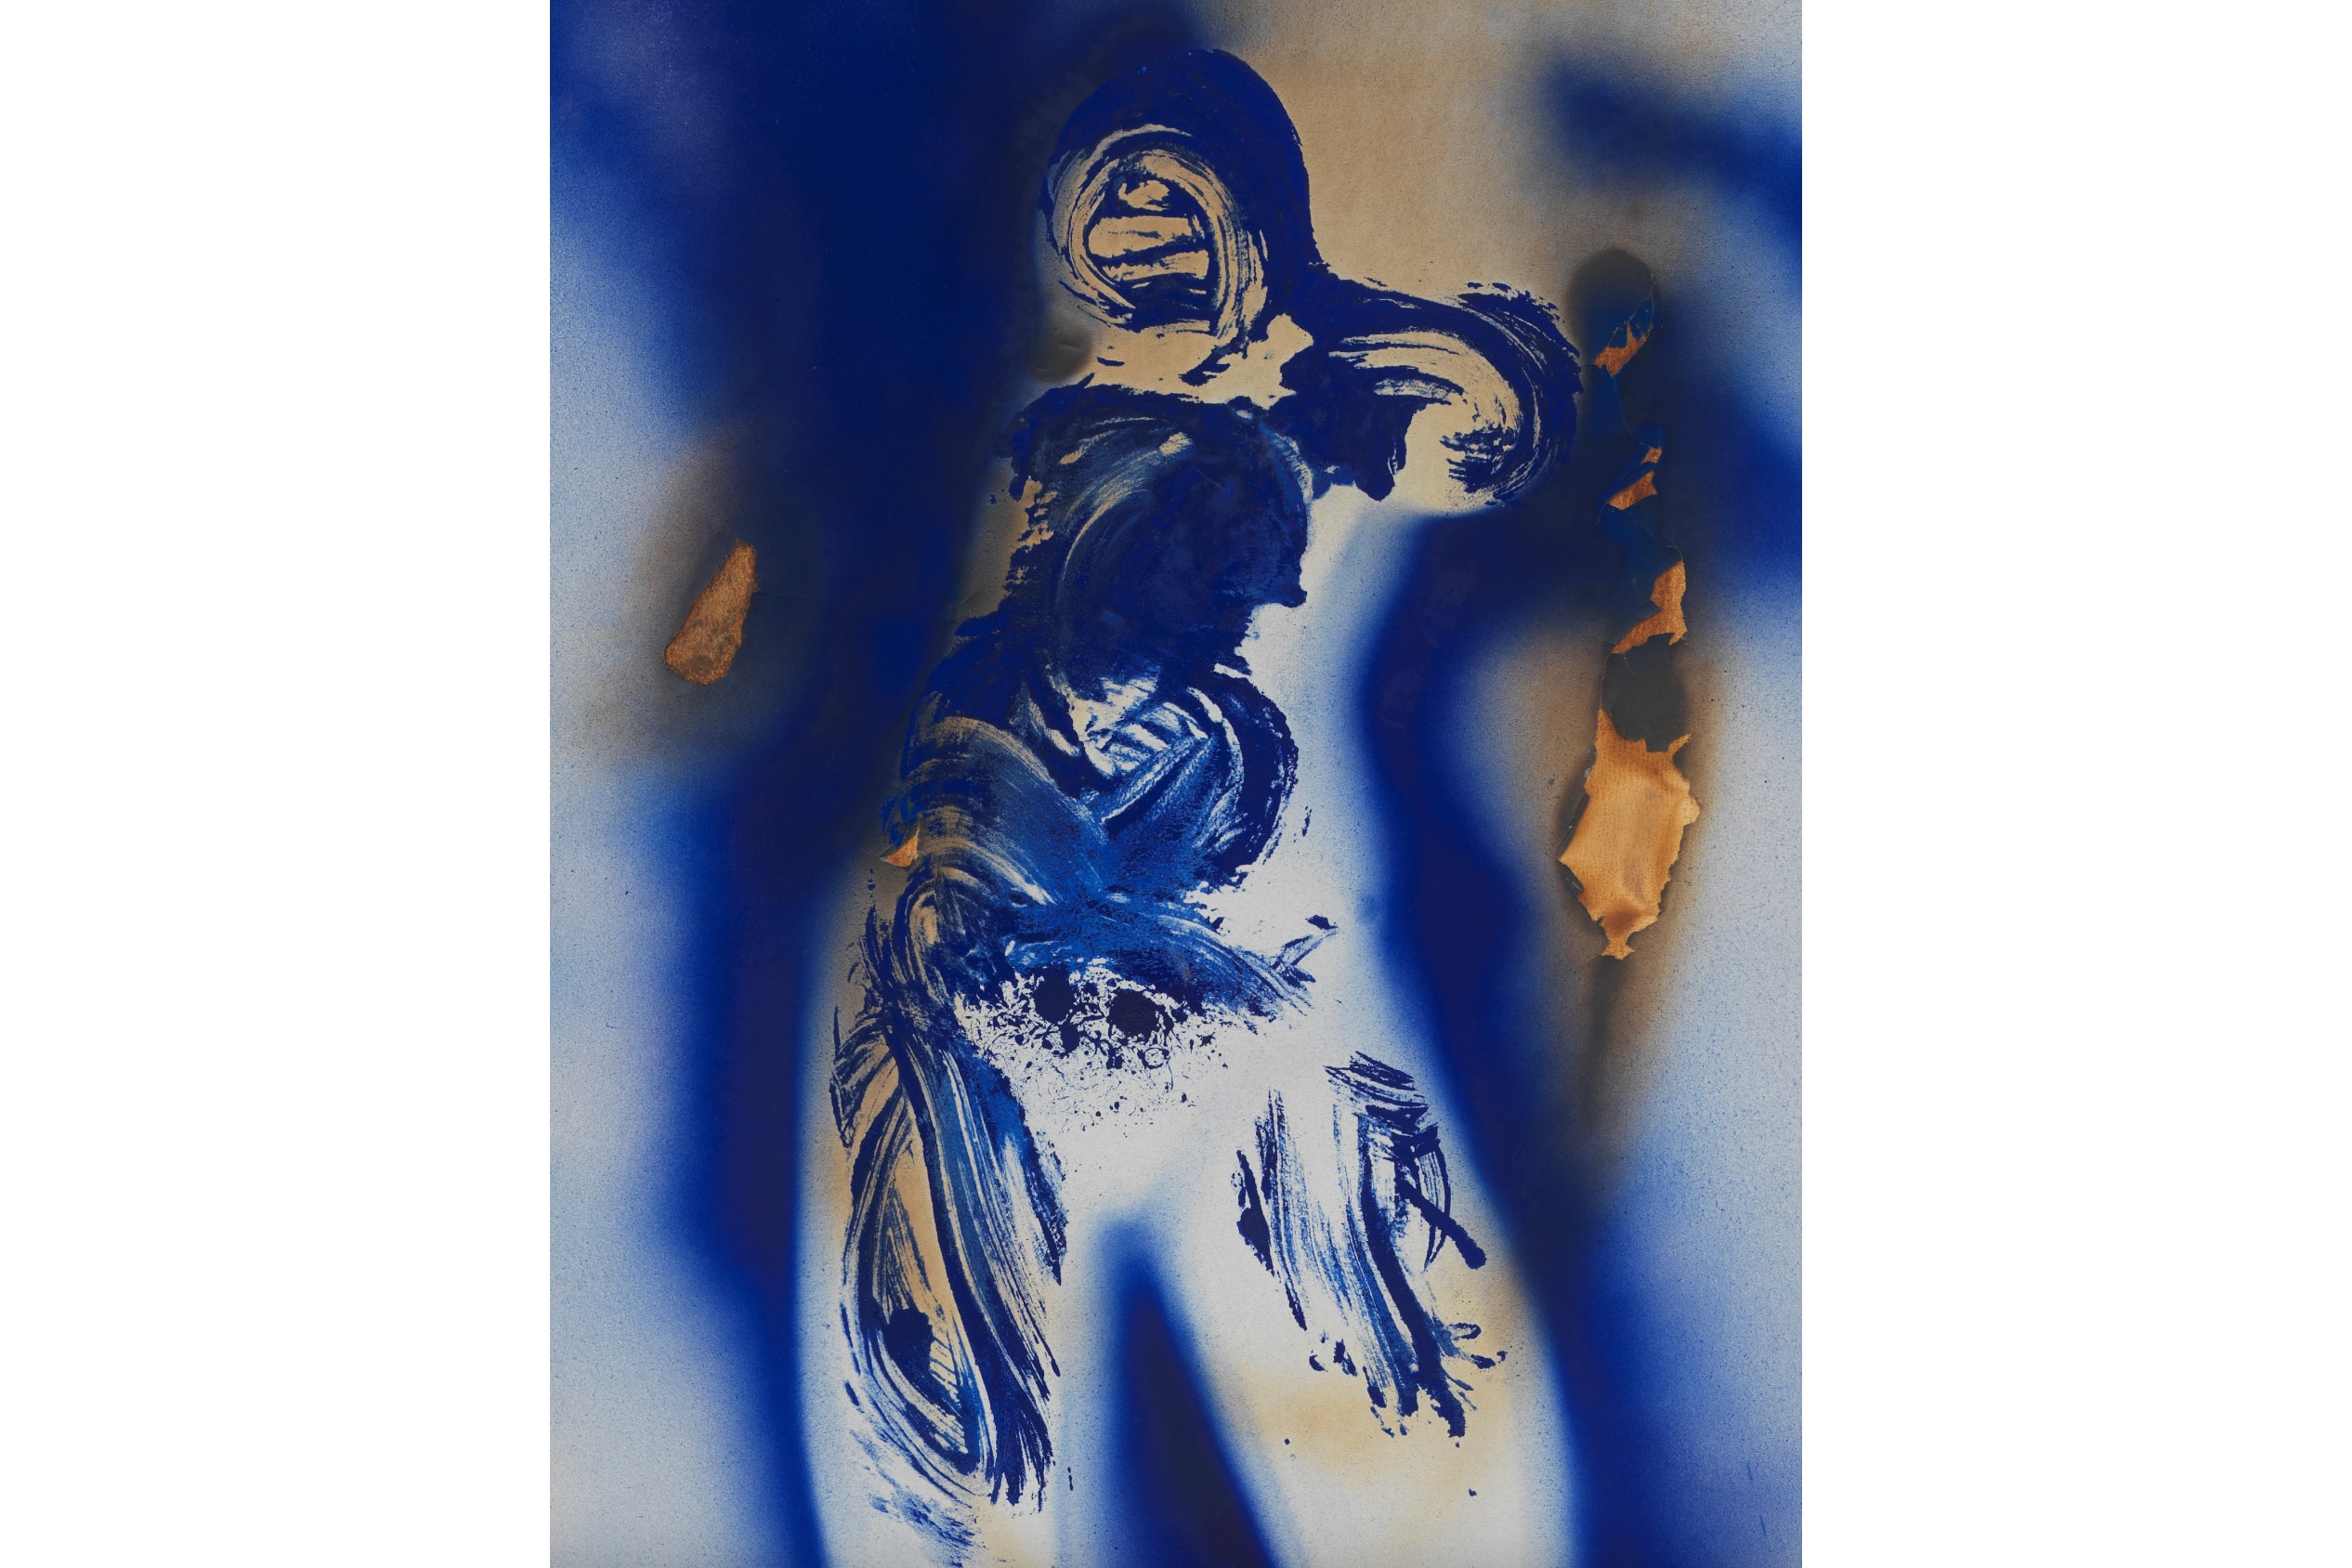 yves klein levy gorvy exhibition artwork paintings contemporary art